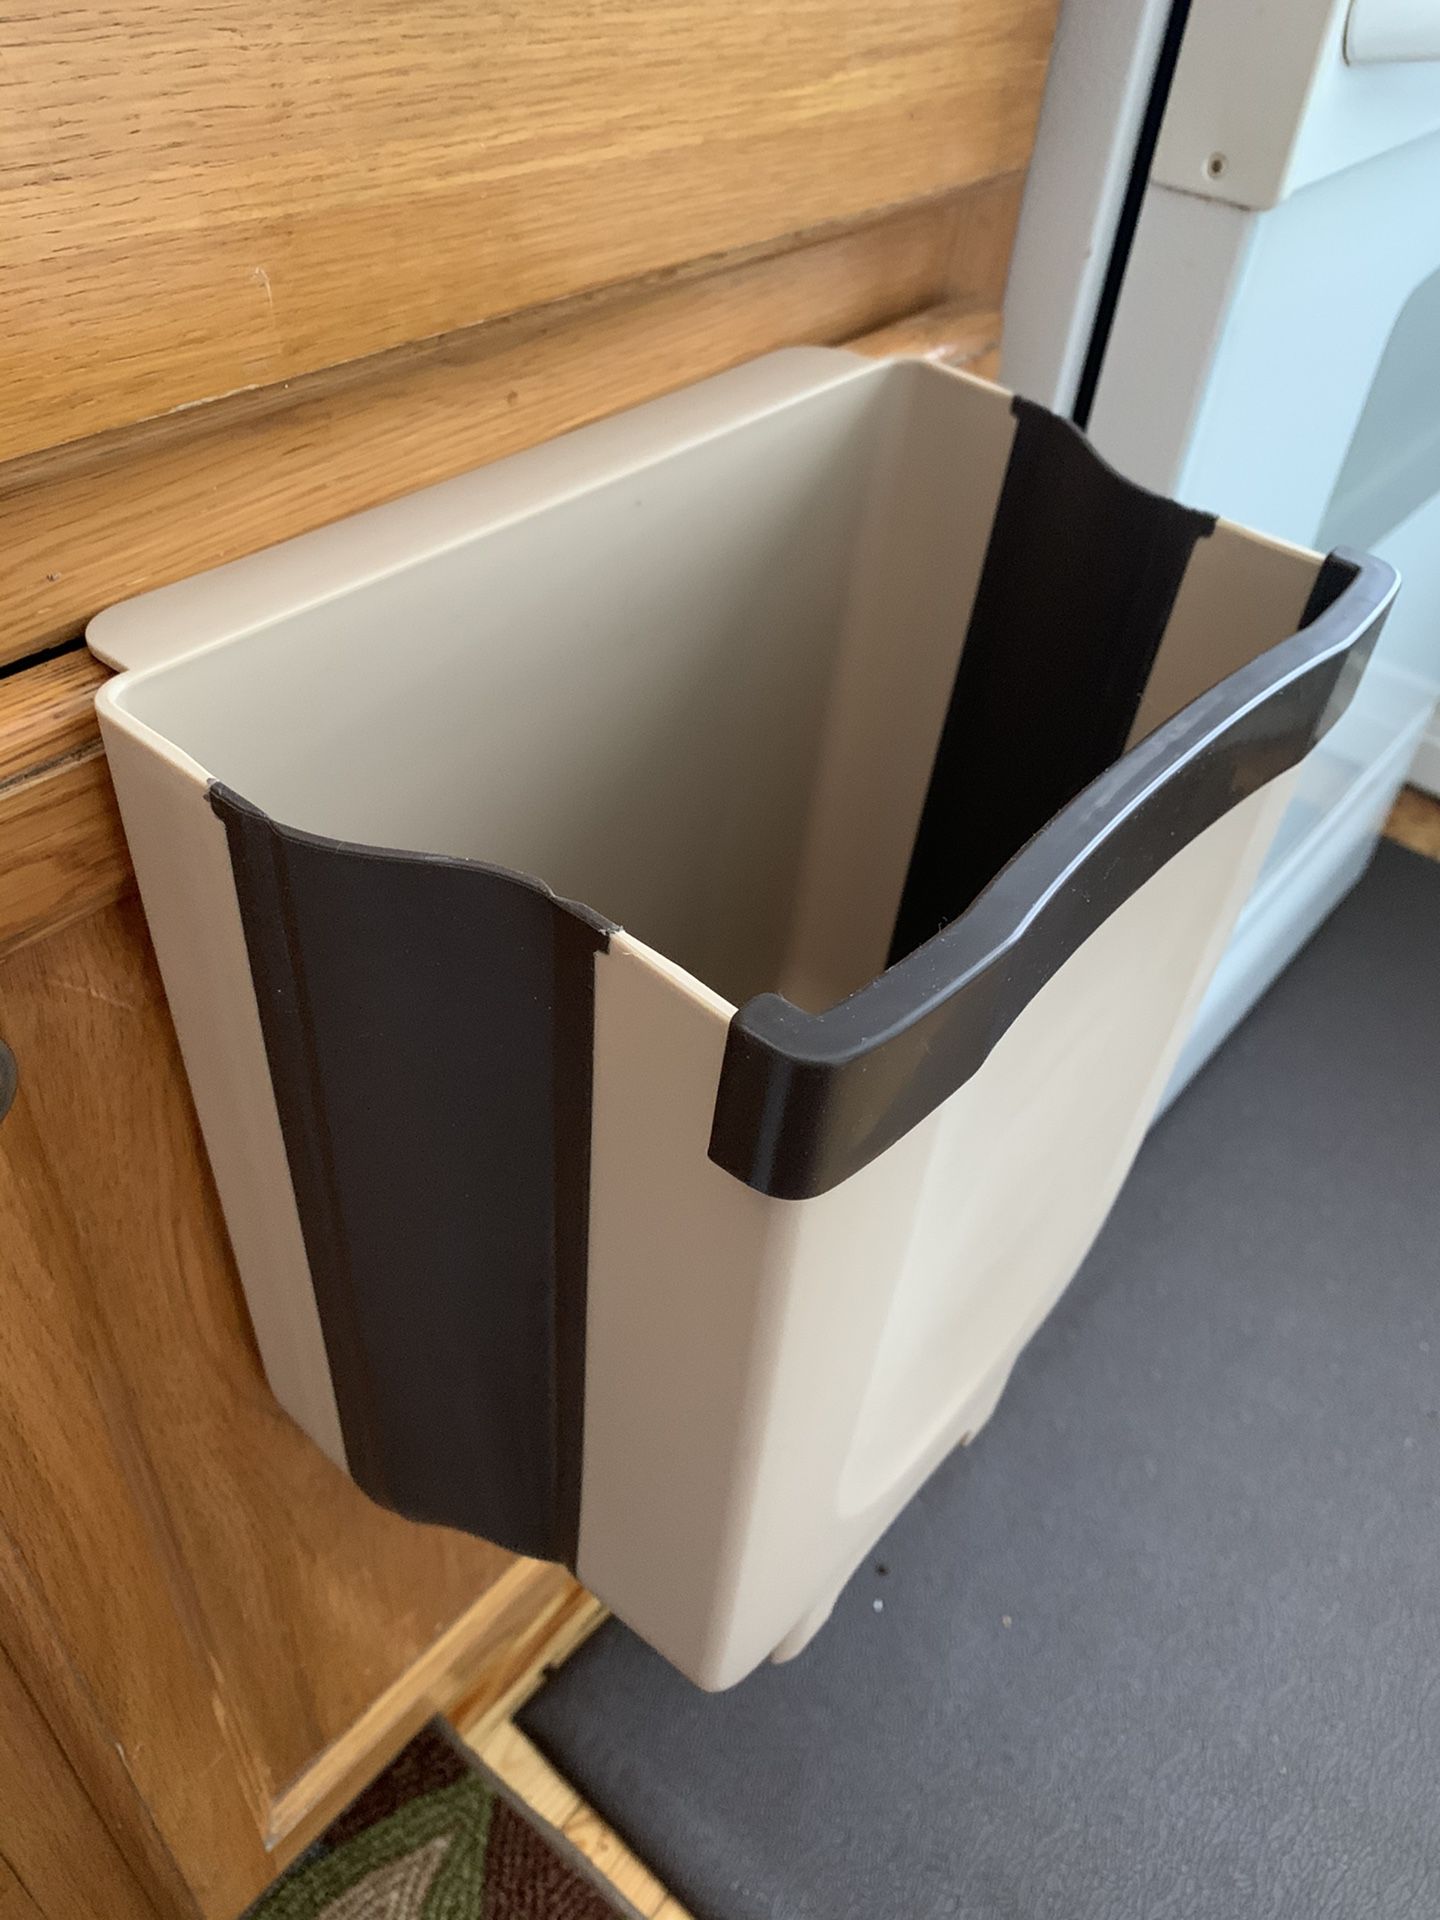 2.4 G Hanging Trash Can for Kitchen Cabinet Door, Small Collapsible Foldable Waste Bins